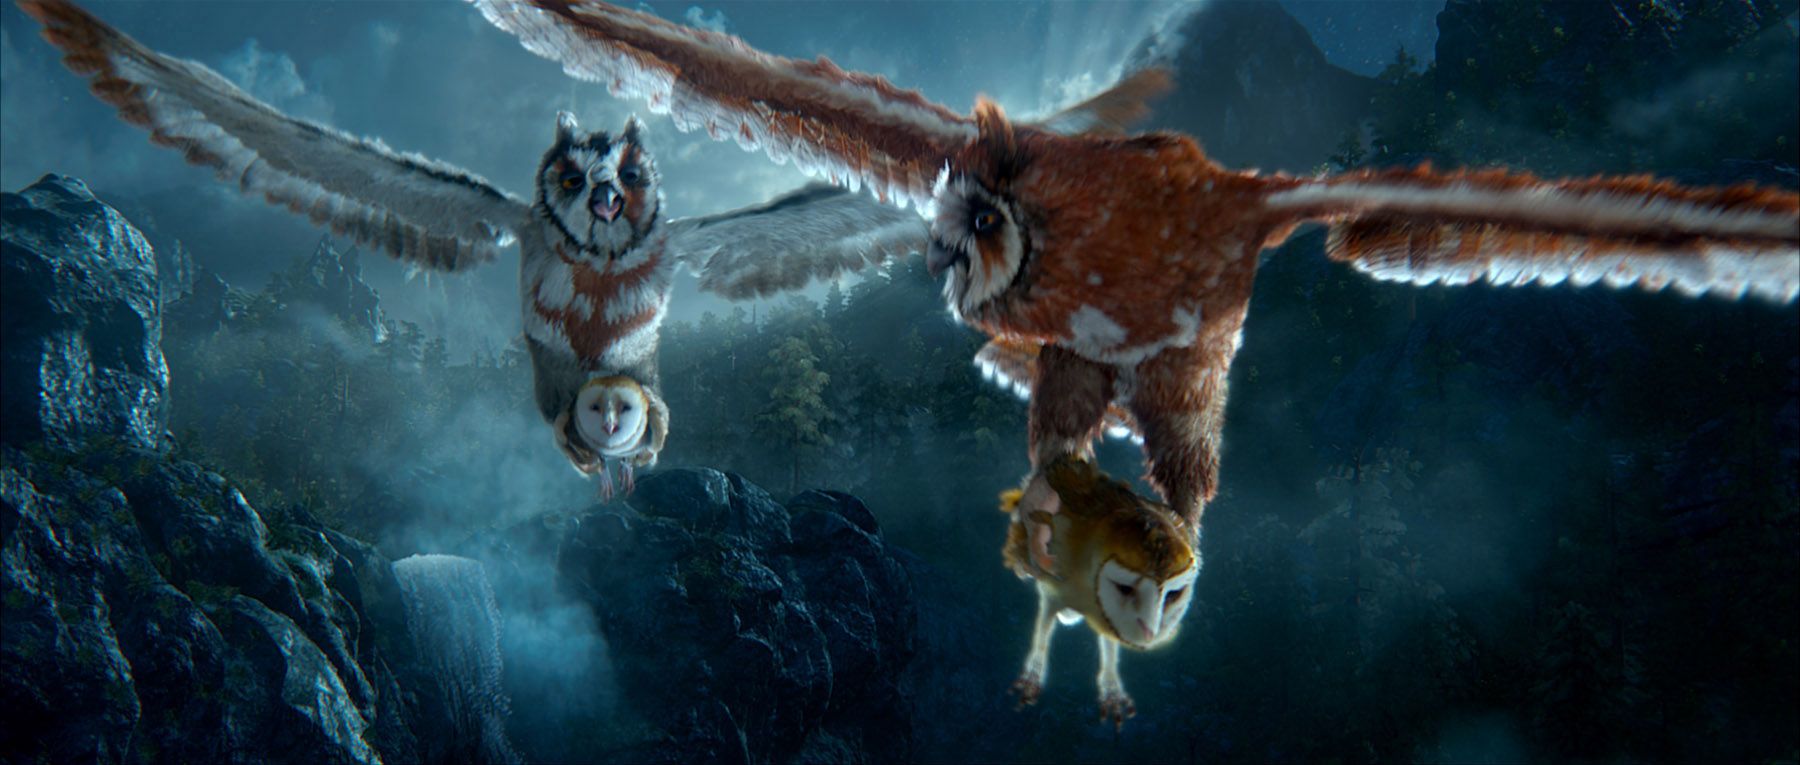 Legend of the Guardians: The Owls of Ga'Hoole Image #5